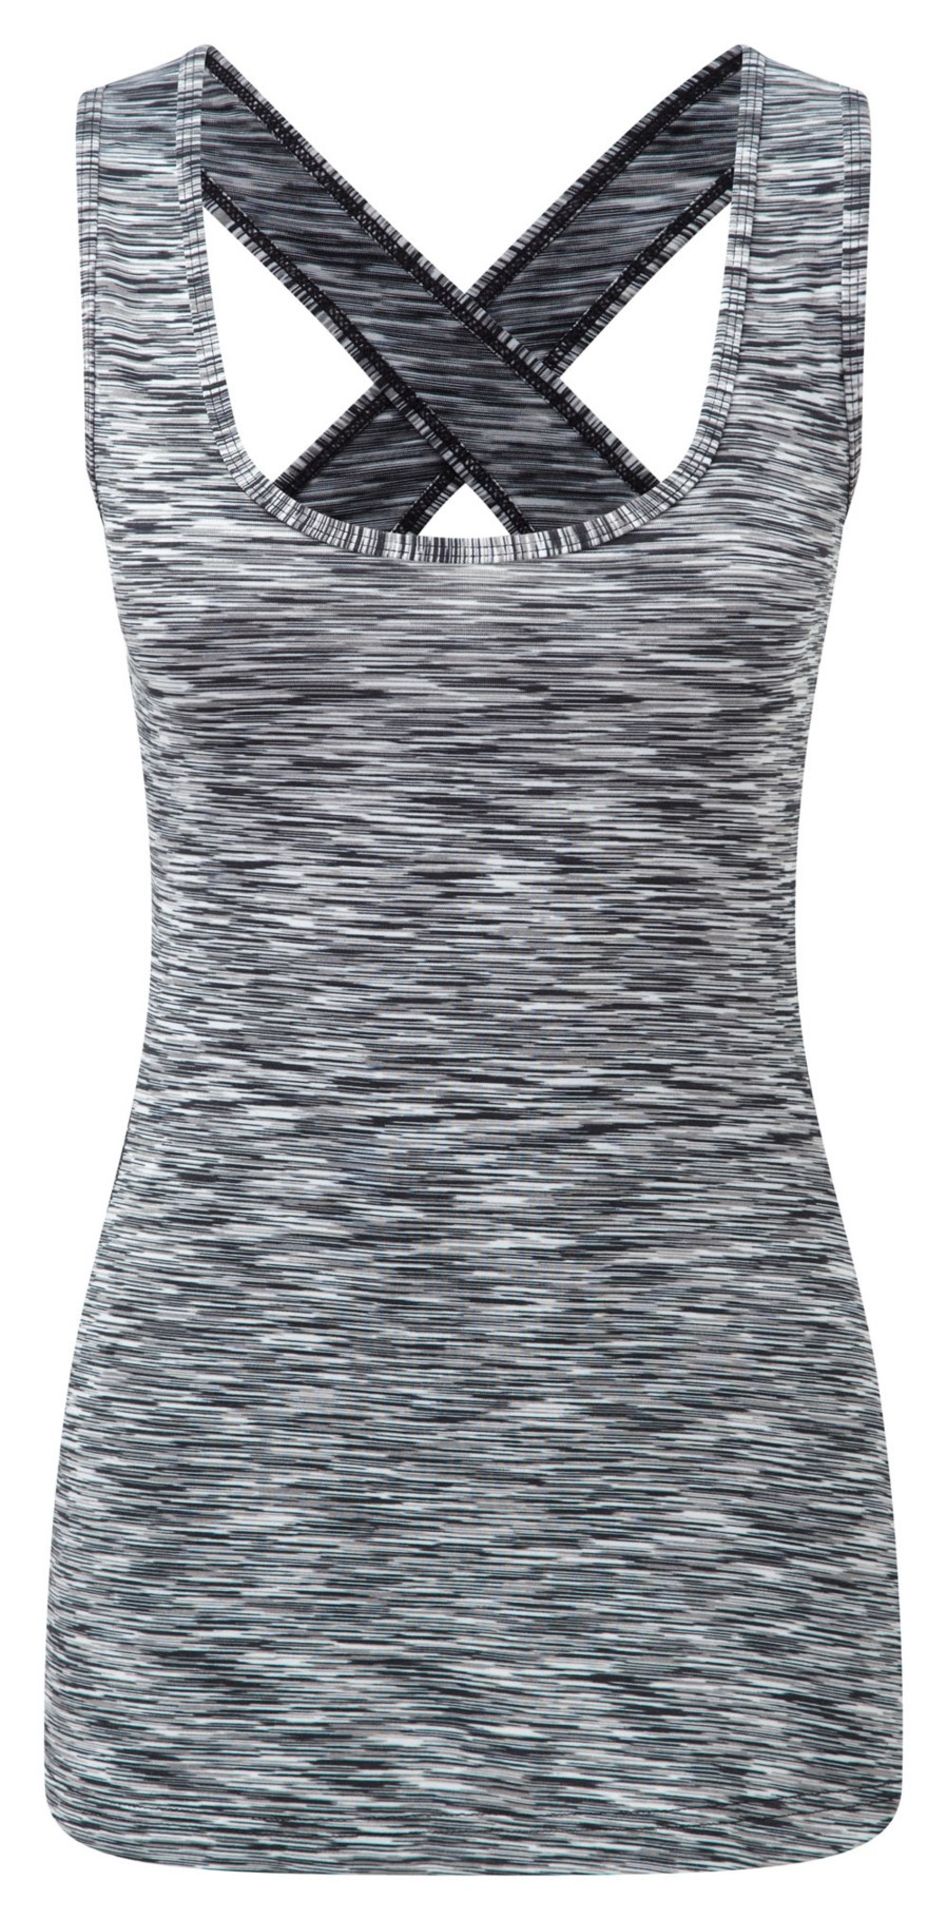 Liquidation of A Premium Gymwear Clothing Brand - 3,034 Items RRP £83,283.30. Huge variety of sizes, - Image 8 of 11